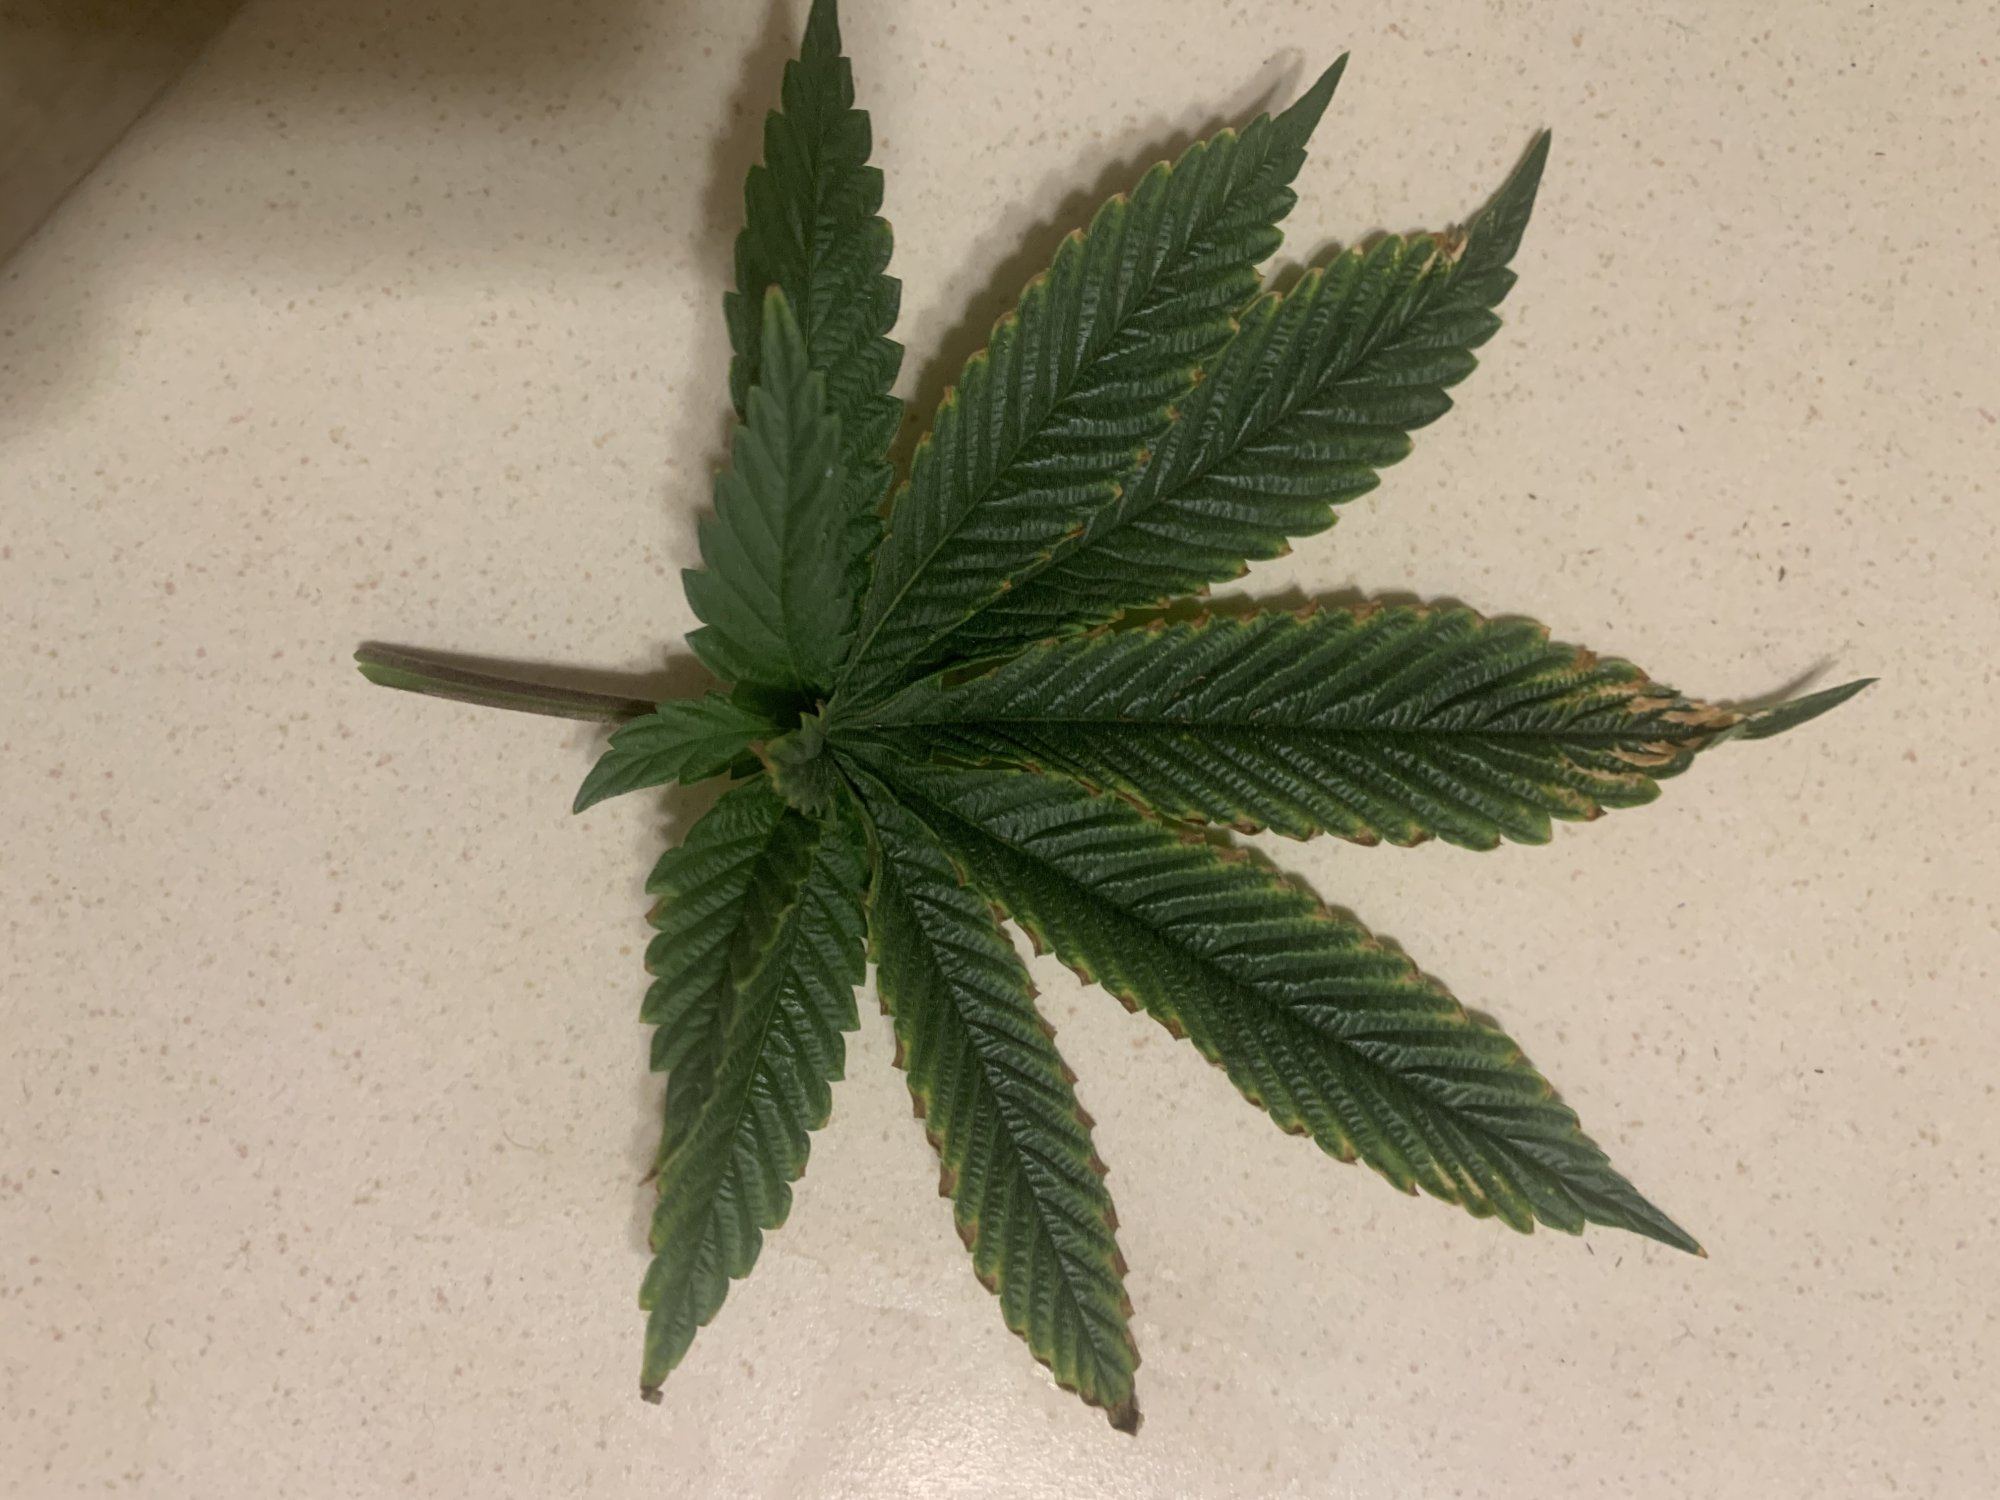 Leafs show signs of deficiency